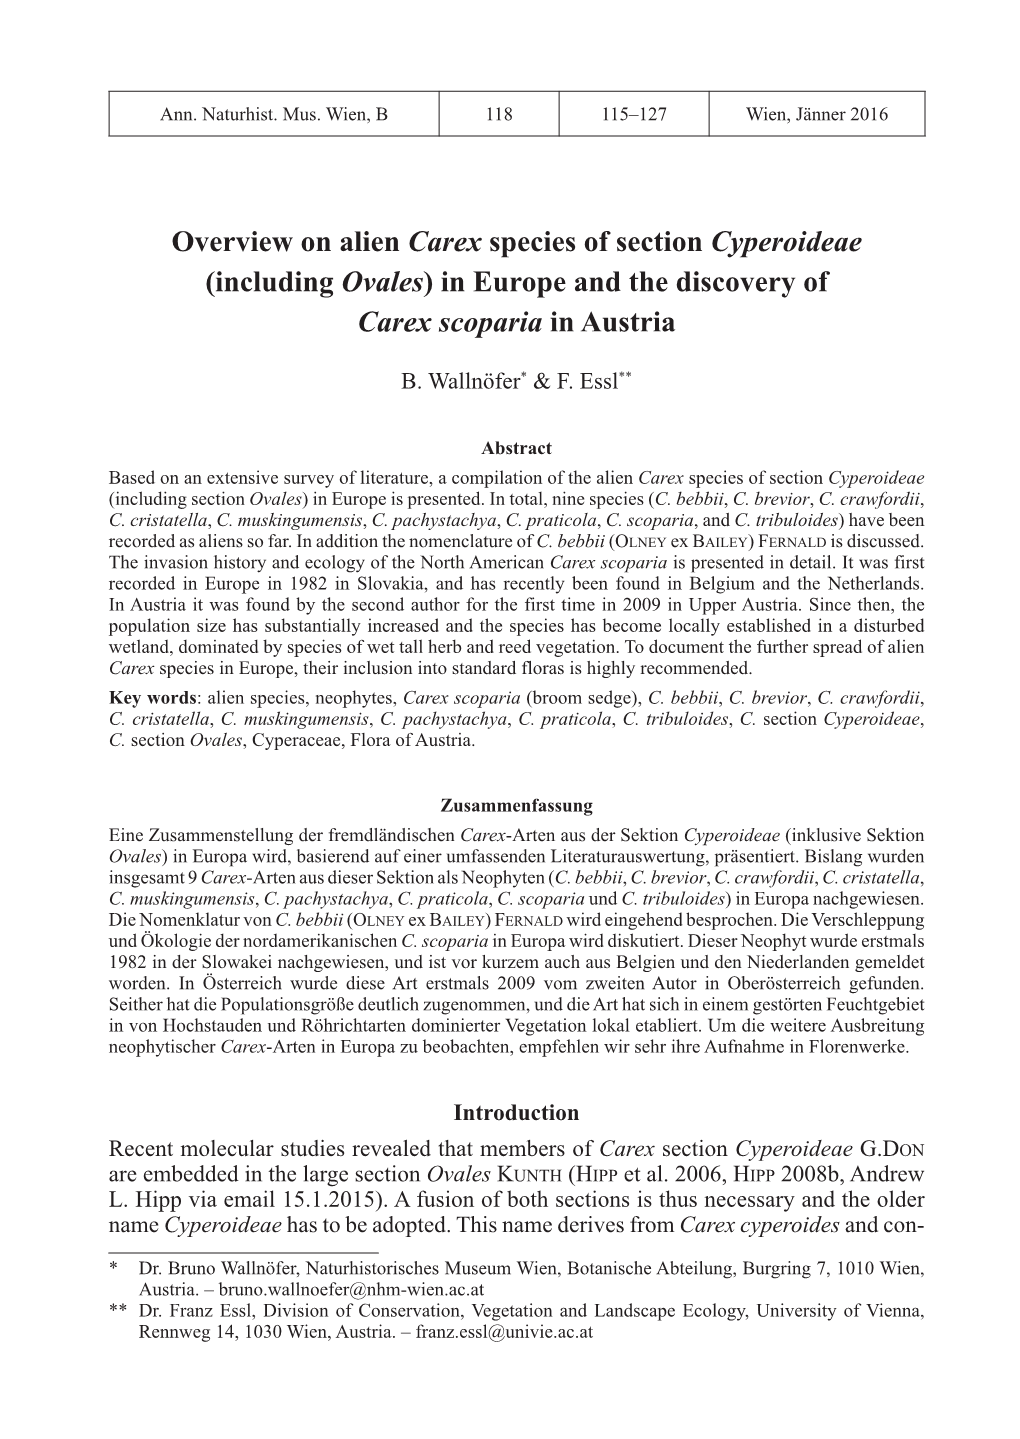 Overview on Alien Carex Species of Section Cyperoideae (Including Ovales) in Europe and the Discovery of Carex Scoparia in Austria